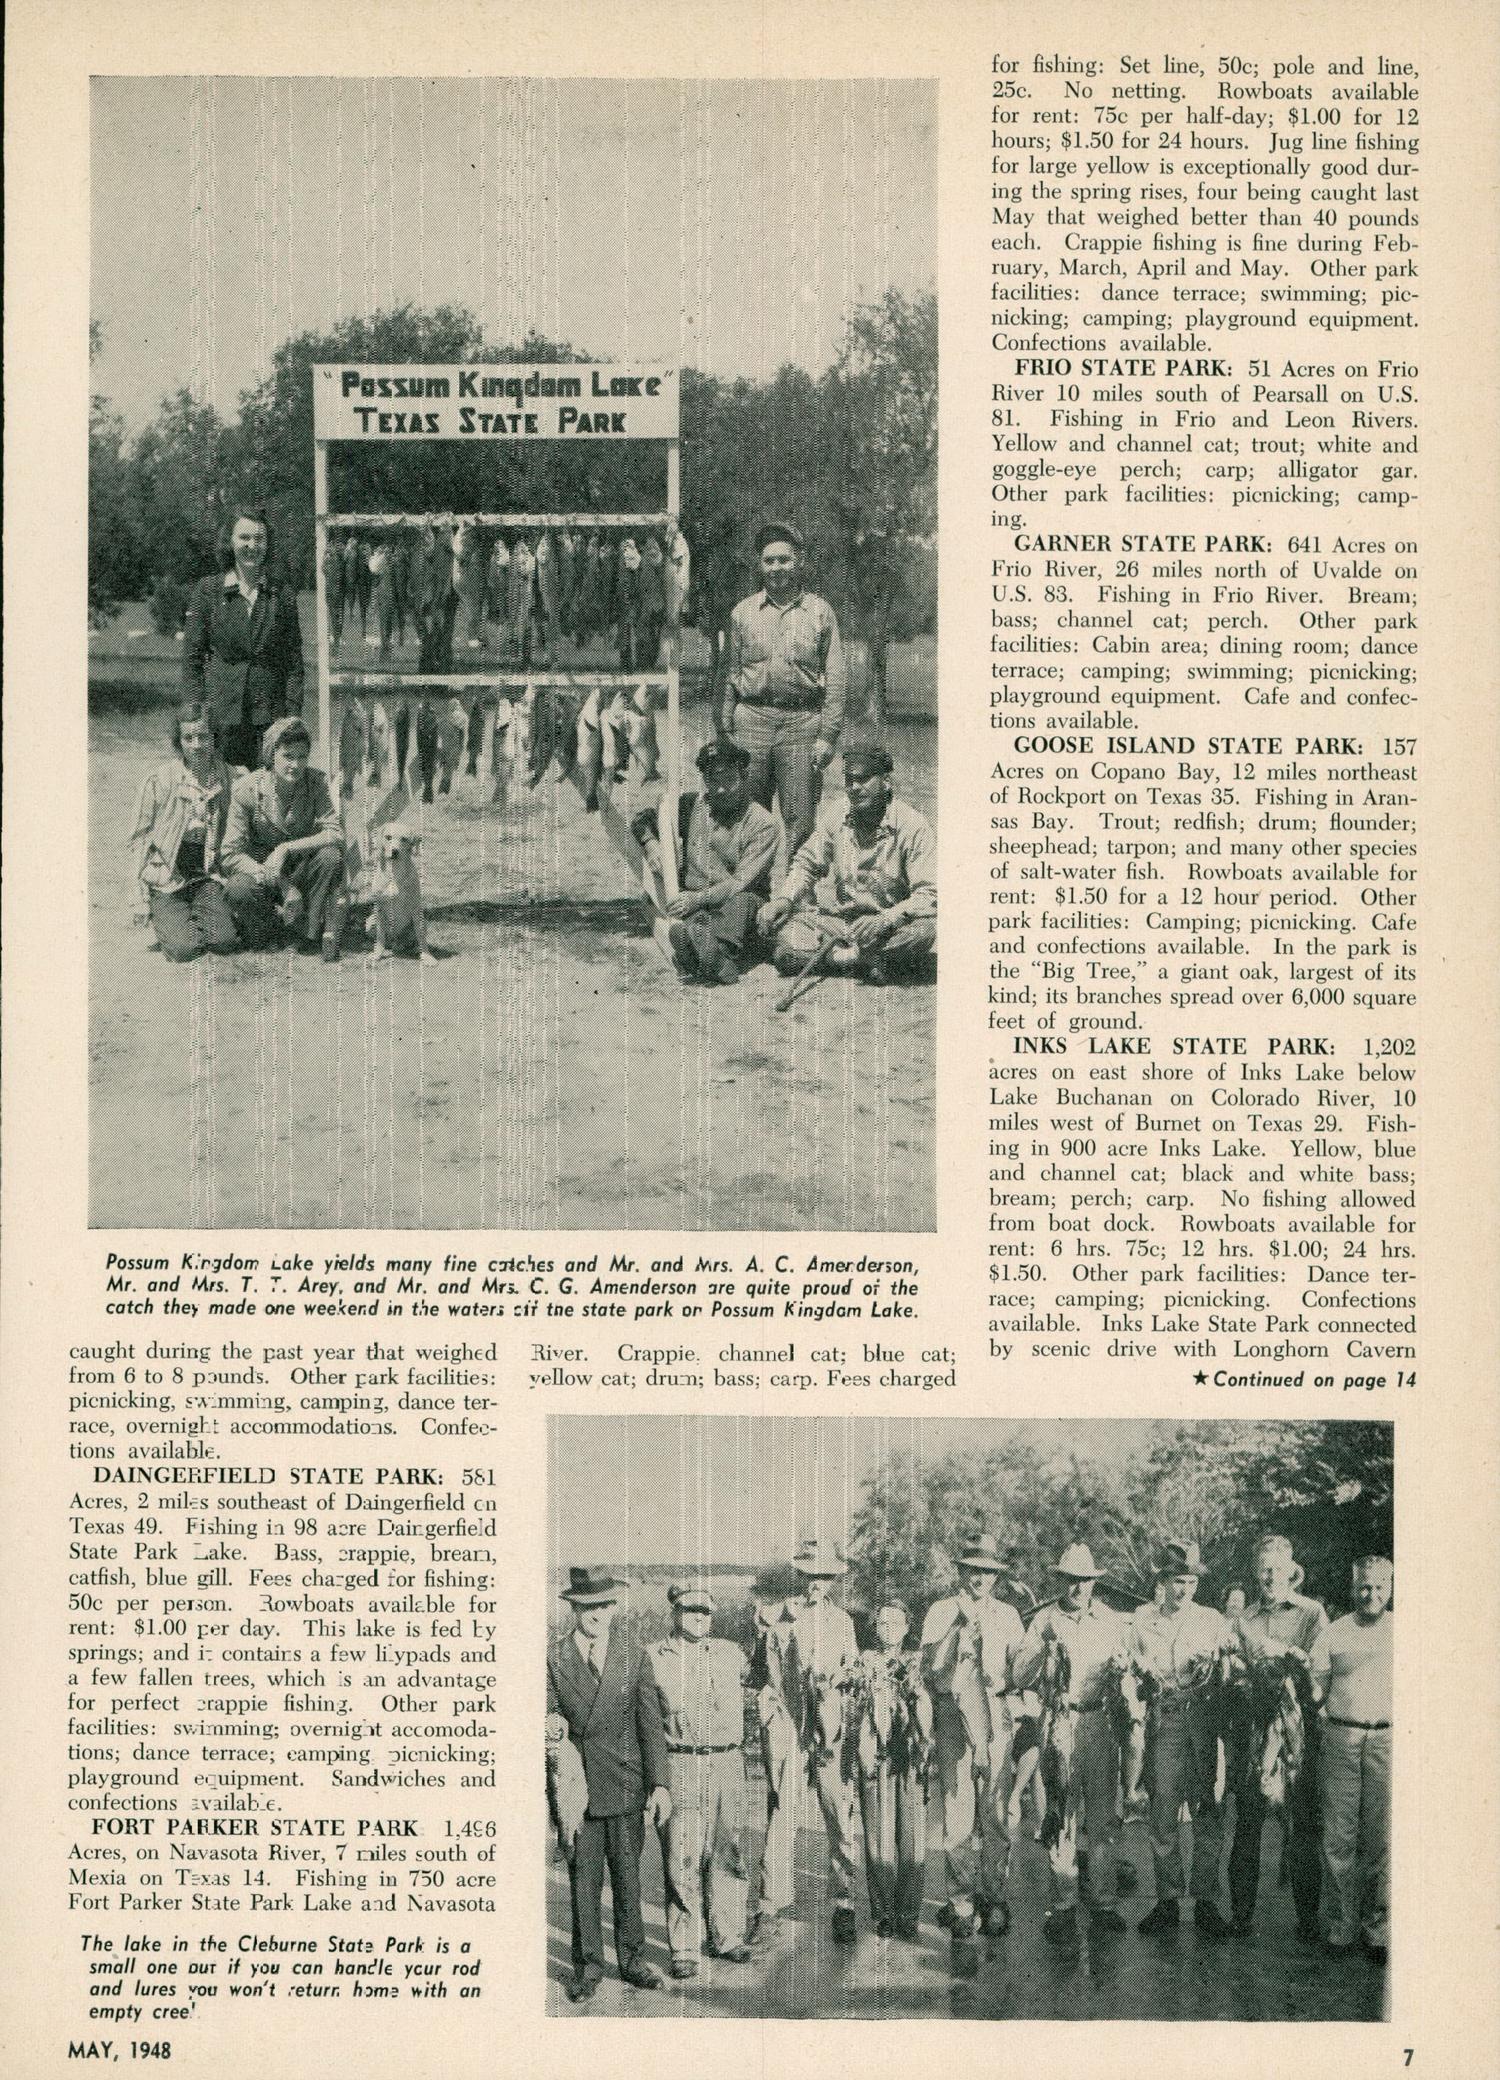 Texas Game and Fish, Volume 6, Number 6, May 1948
                                                
                                                    7
                                                